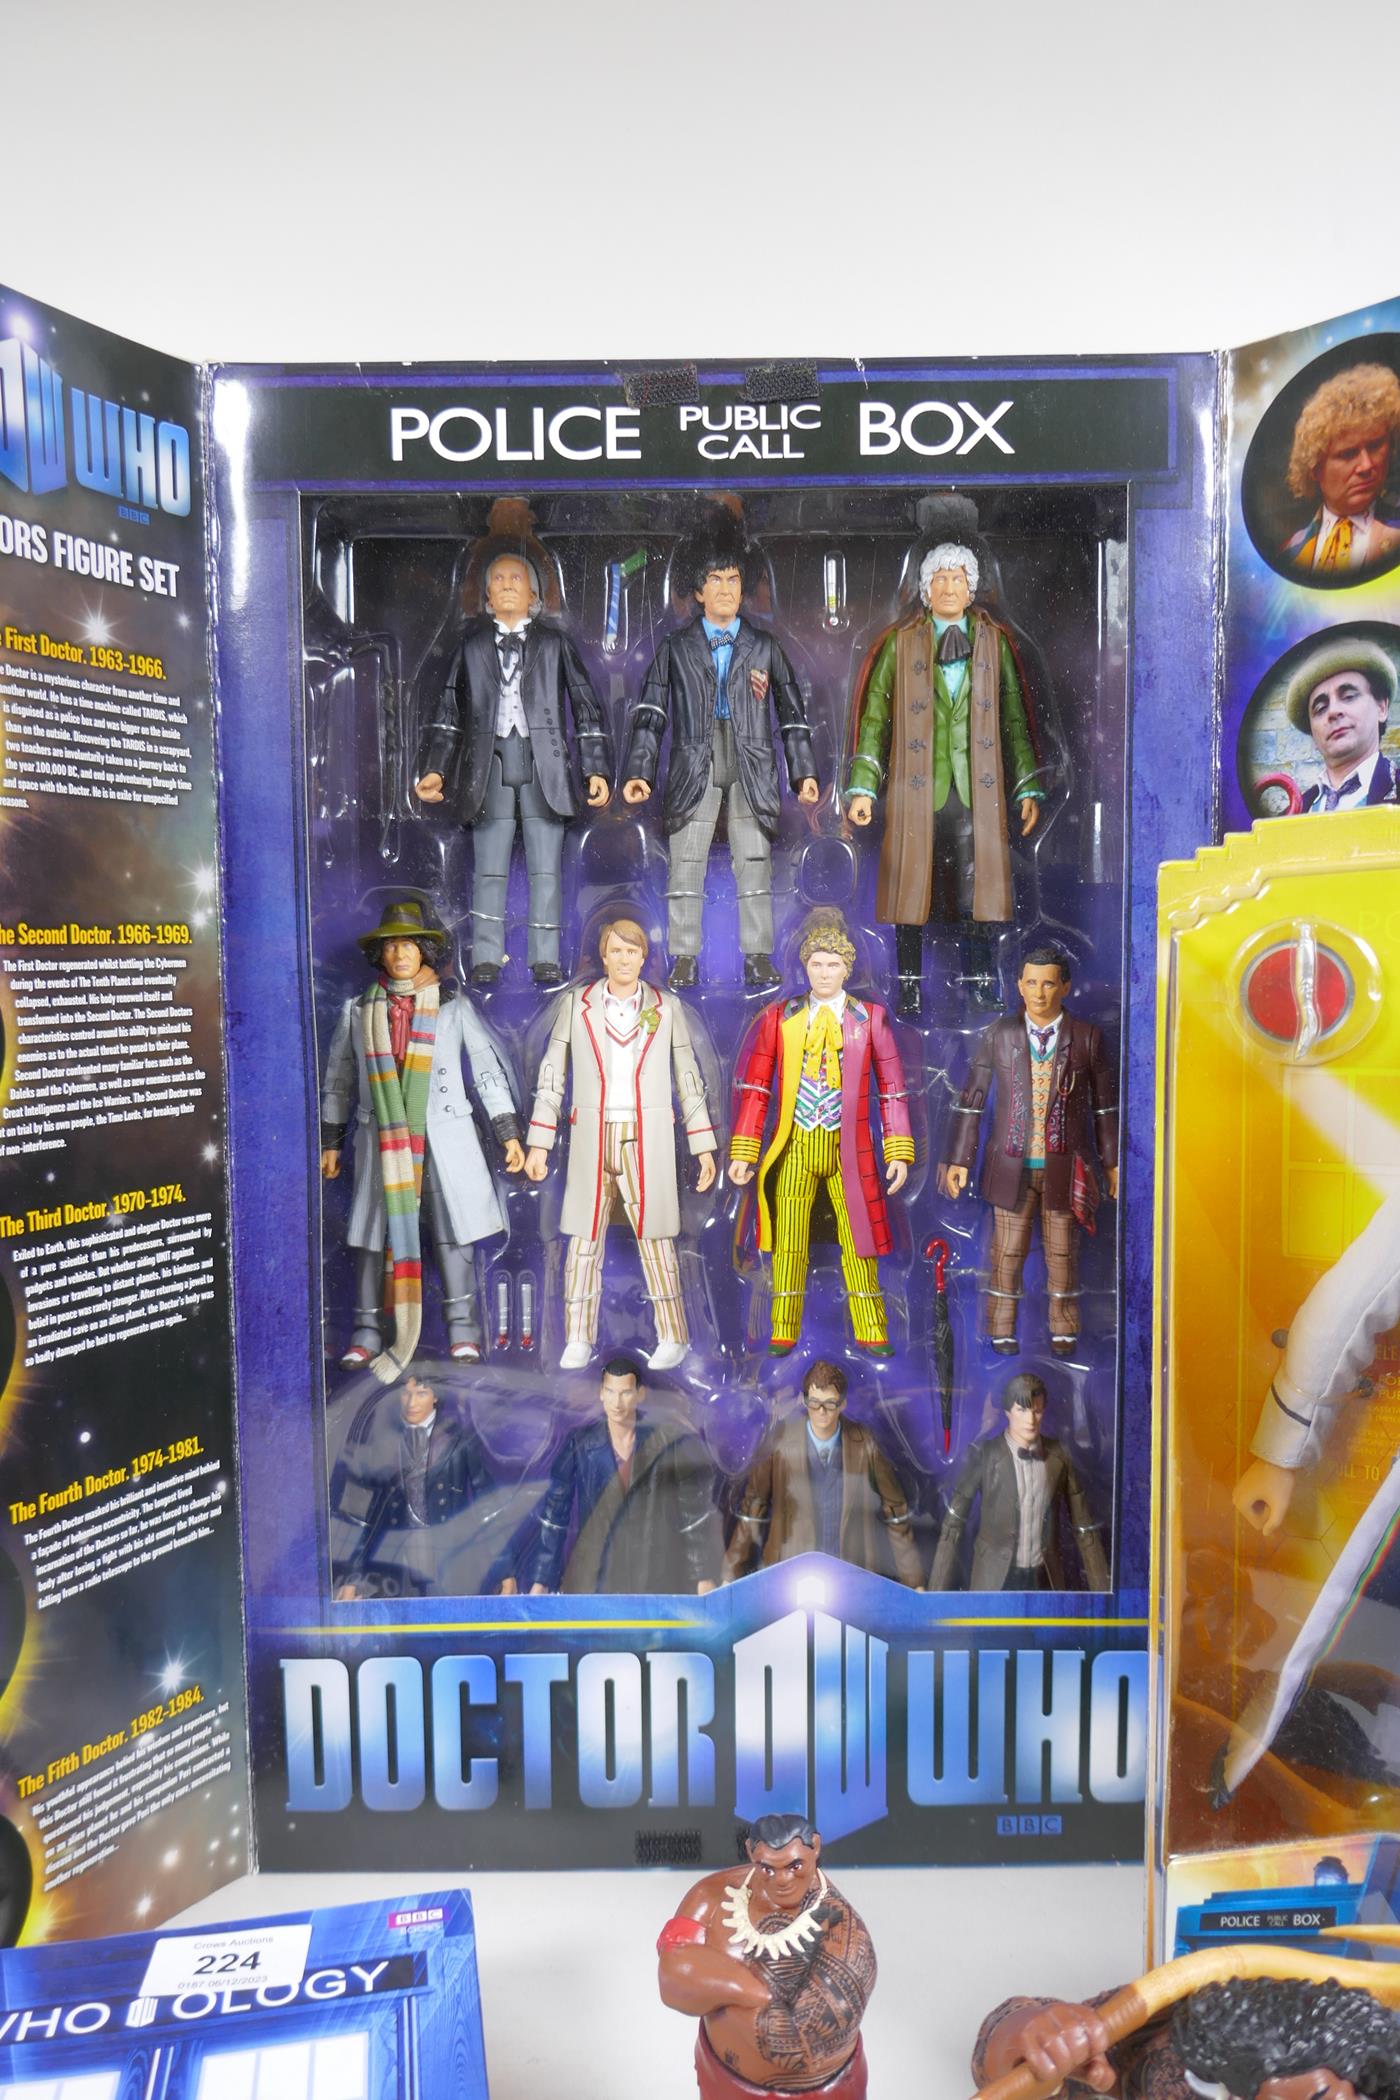 Dr Who Eleven Doctors figure set, Who-ology book, 13th Doctor adventure doll, Ben 10 omni-naut- - Image 2 of 6